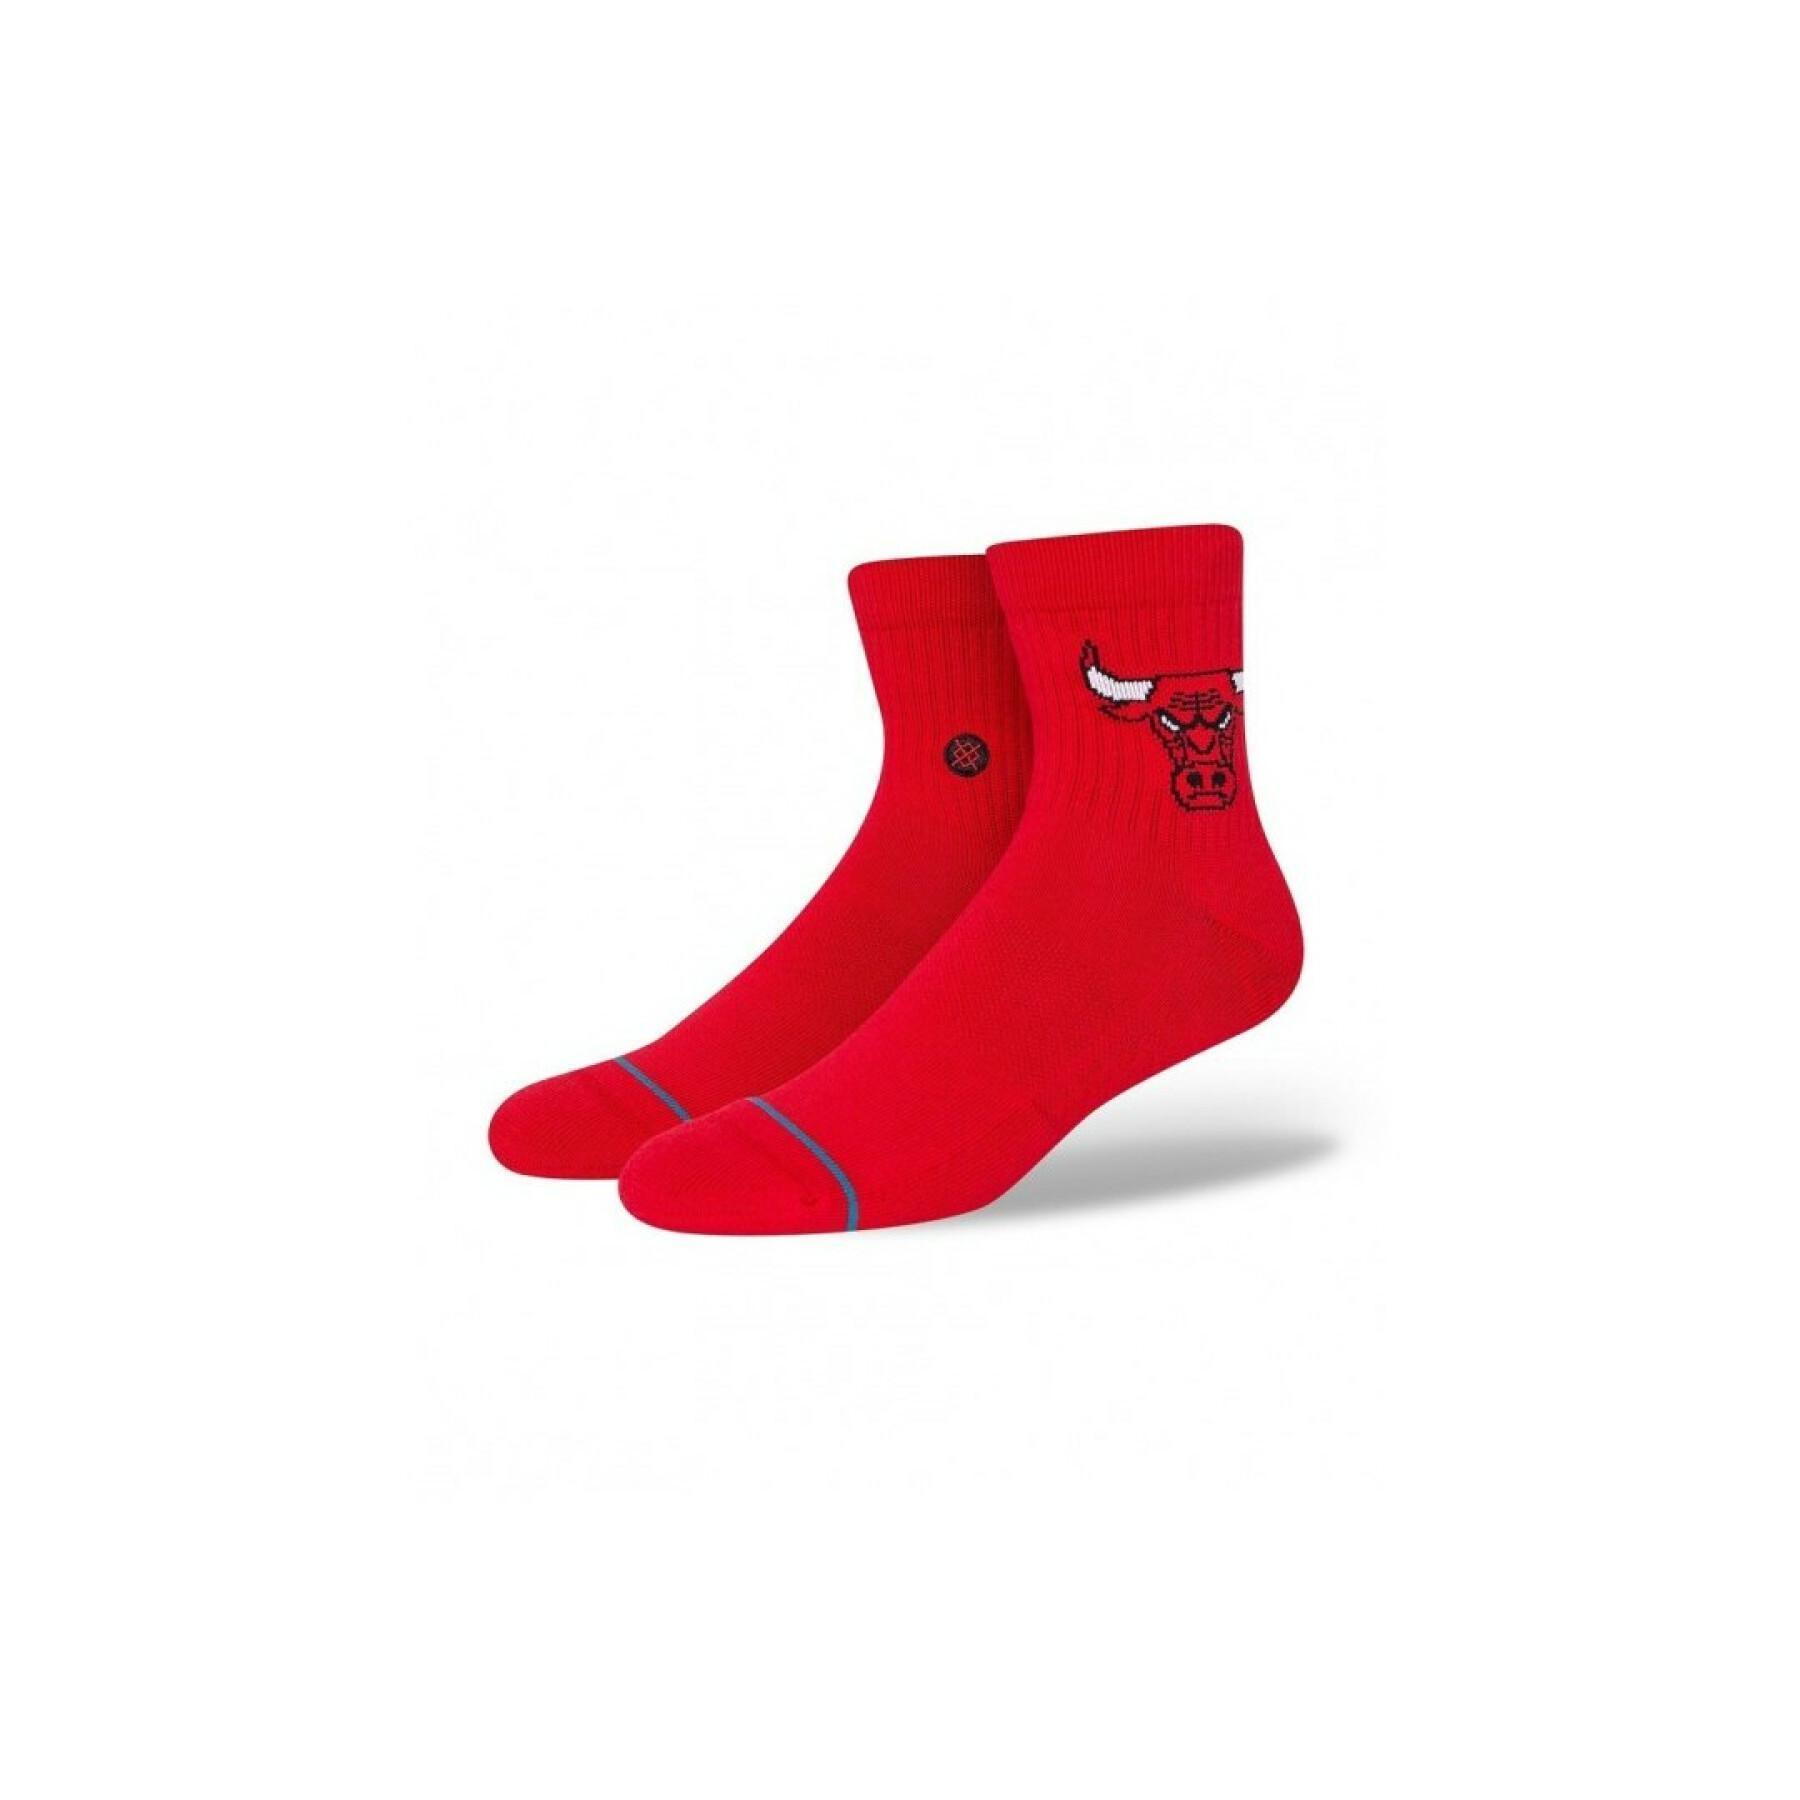 Calcetines Chicago Bulls St Qtr